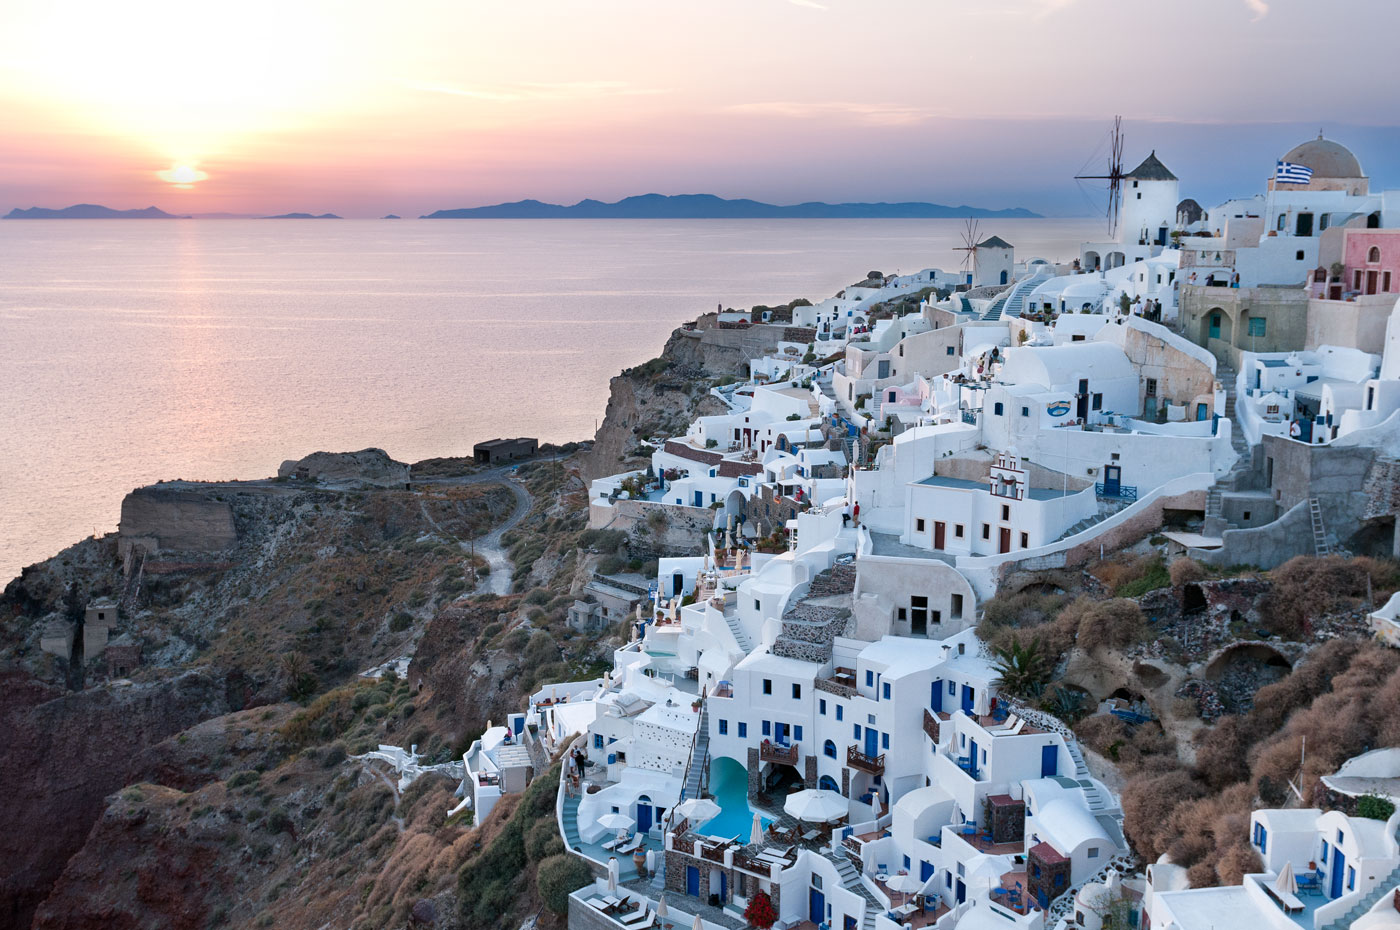 No. 13: Watch the famous sunset from Oia with your lover and a bottle of wine - Oia, Santorini, Greece, 2009